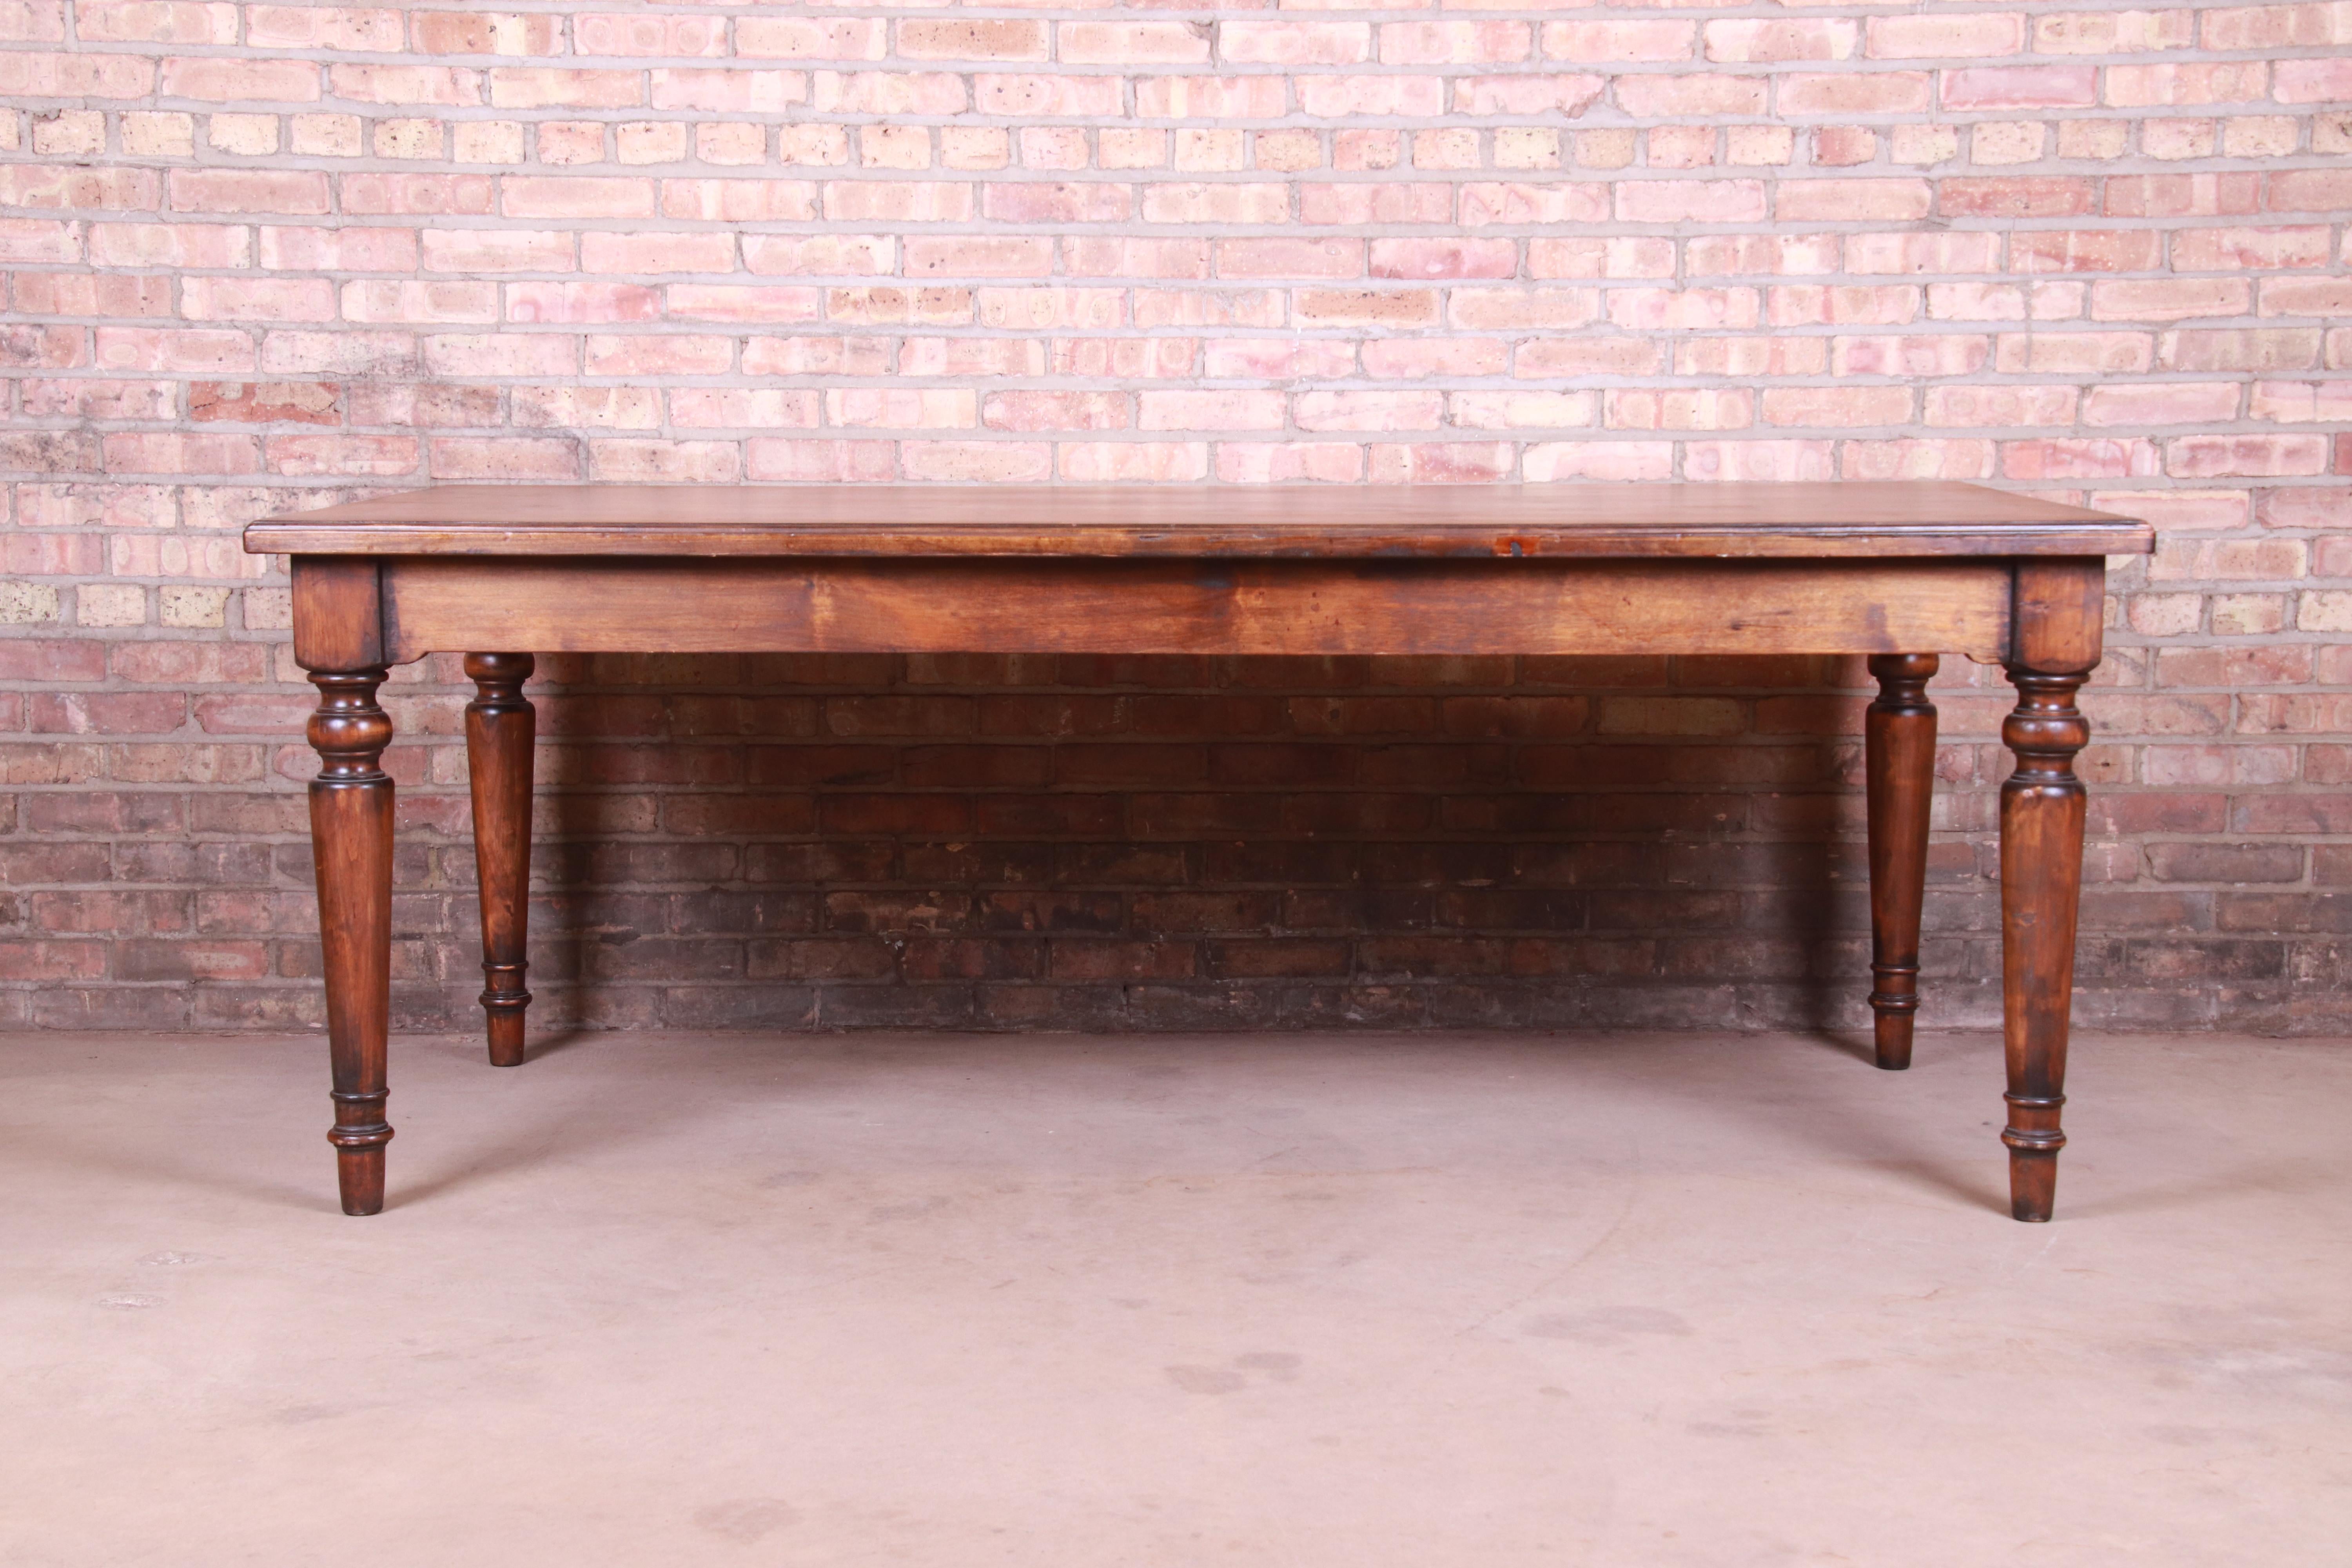 French Provincial 19th Century Rustic French Harvest Farm Table with Turned Legs